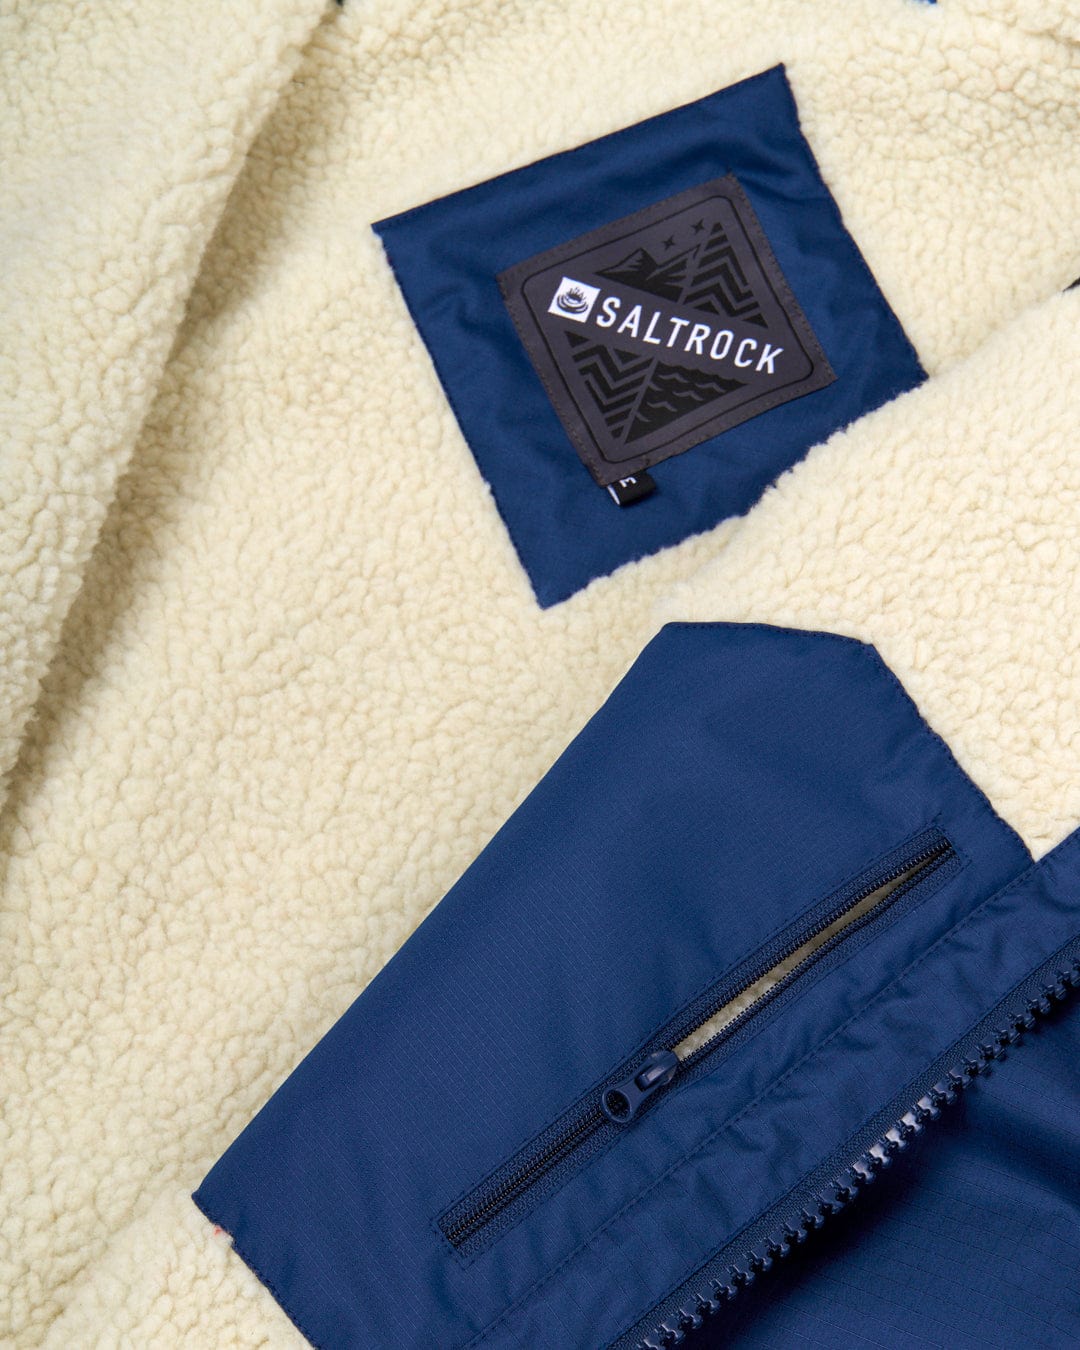 Close-up view of a navy blue Saltrock jacket with a fleece lining, featuring a visible logo patch and zipper detail, redesigned as a waterproof Recycled Four Seasons Changing Robe - Blue.